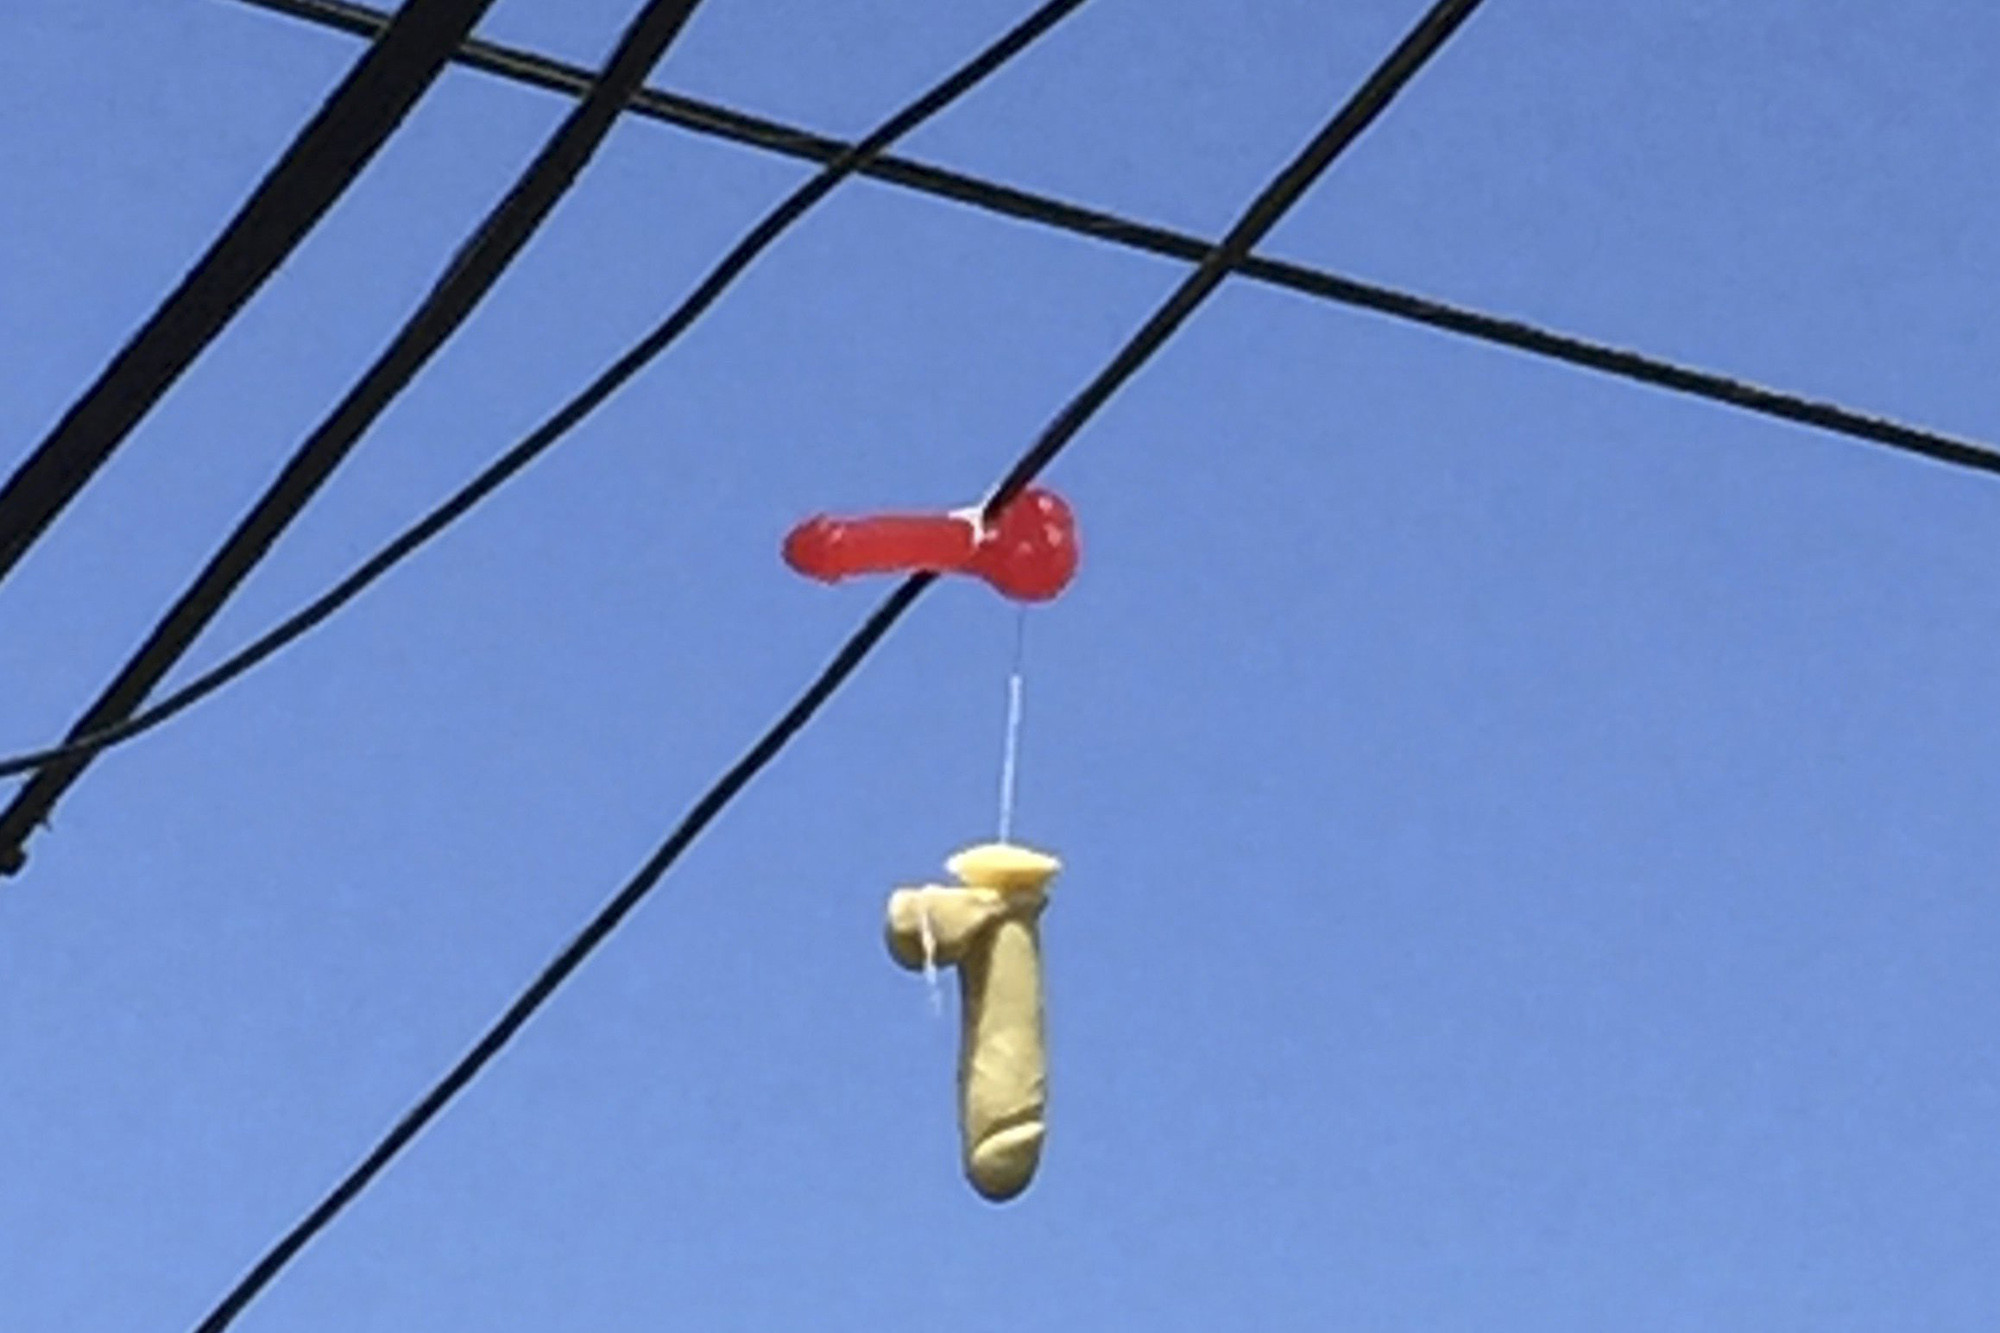 Hundreds of sex toys dangle from Portland power lines